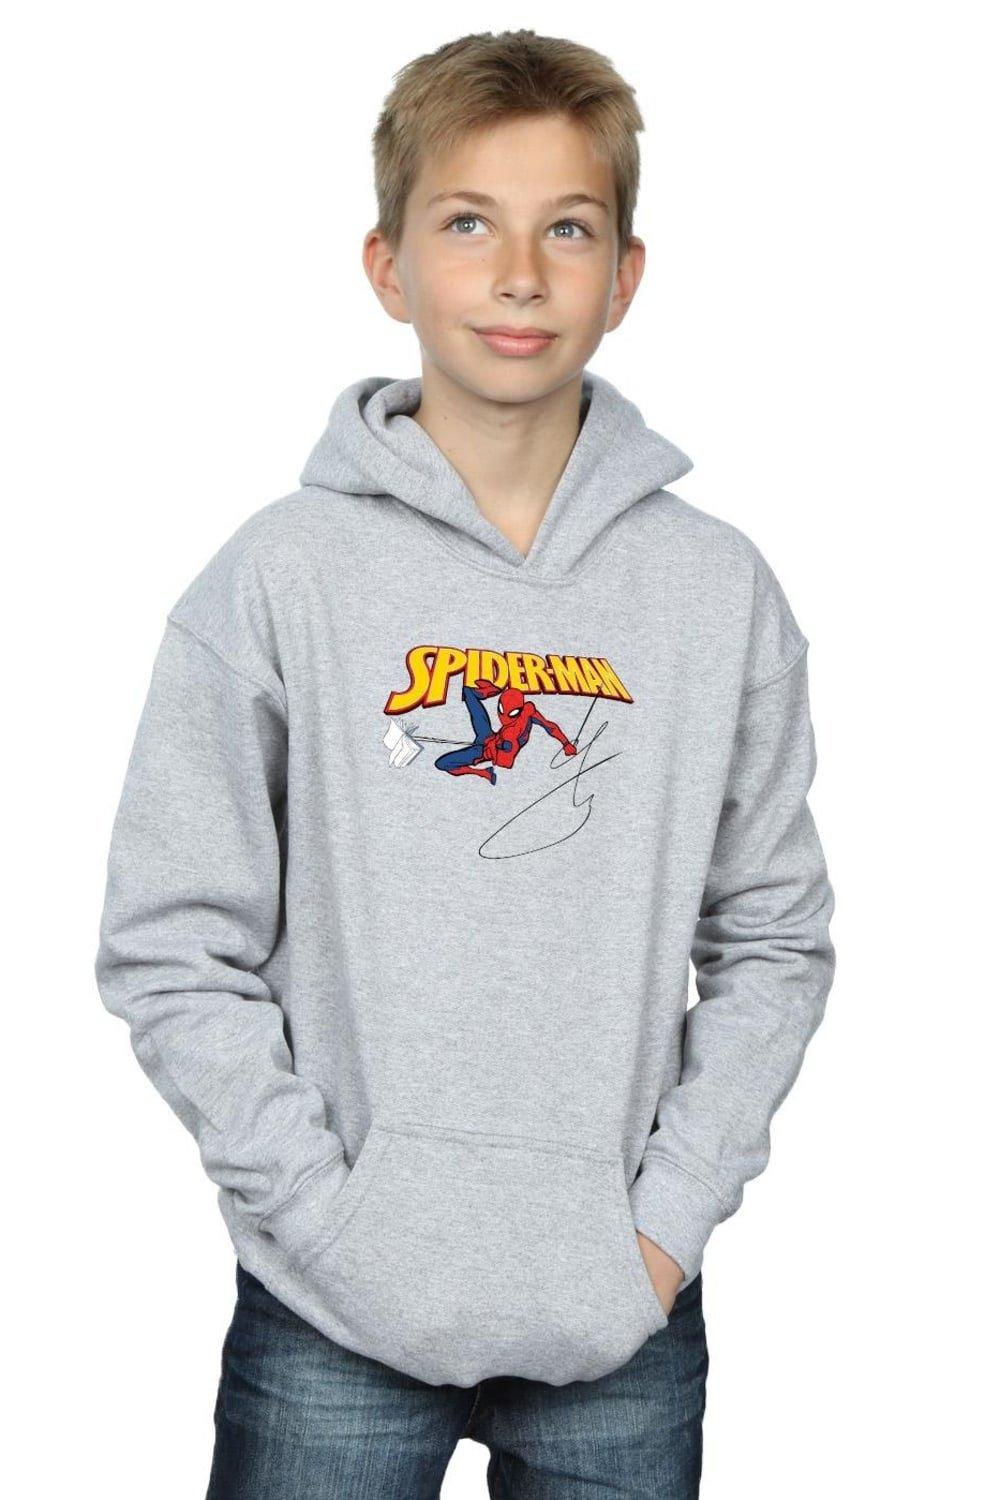 Spider-Man With A Book Hoodie